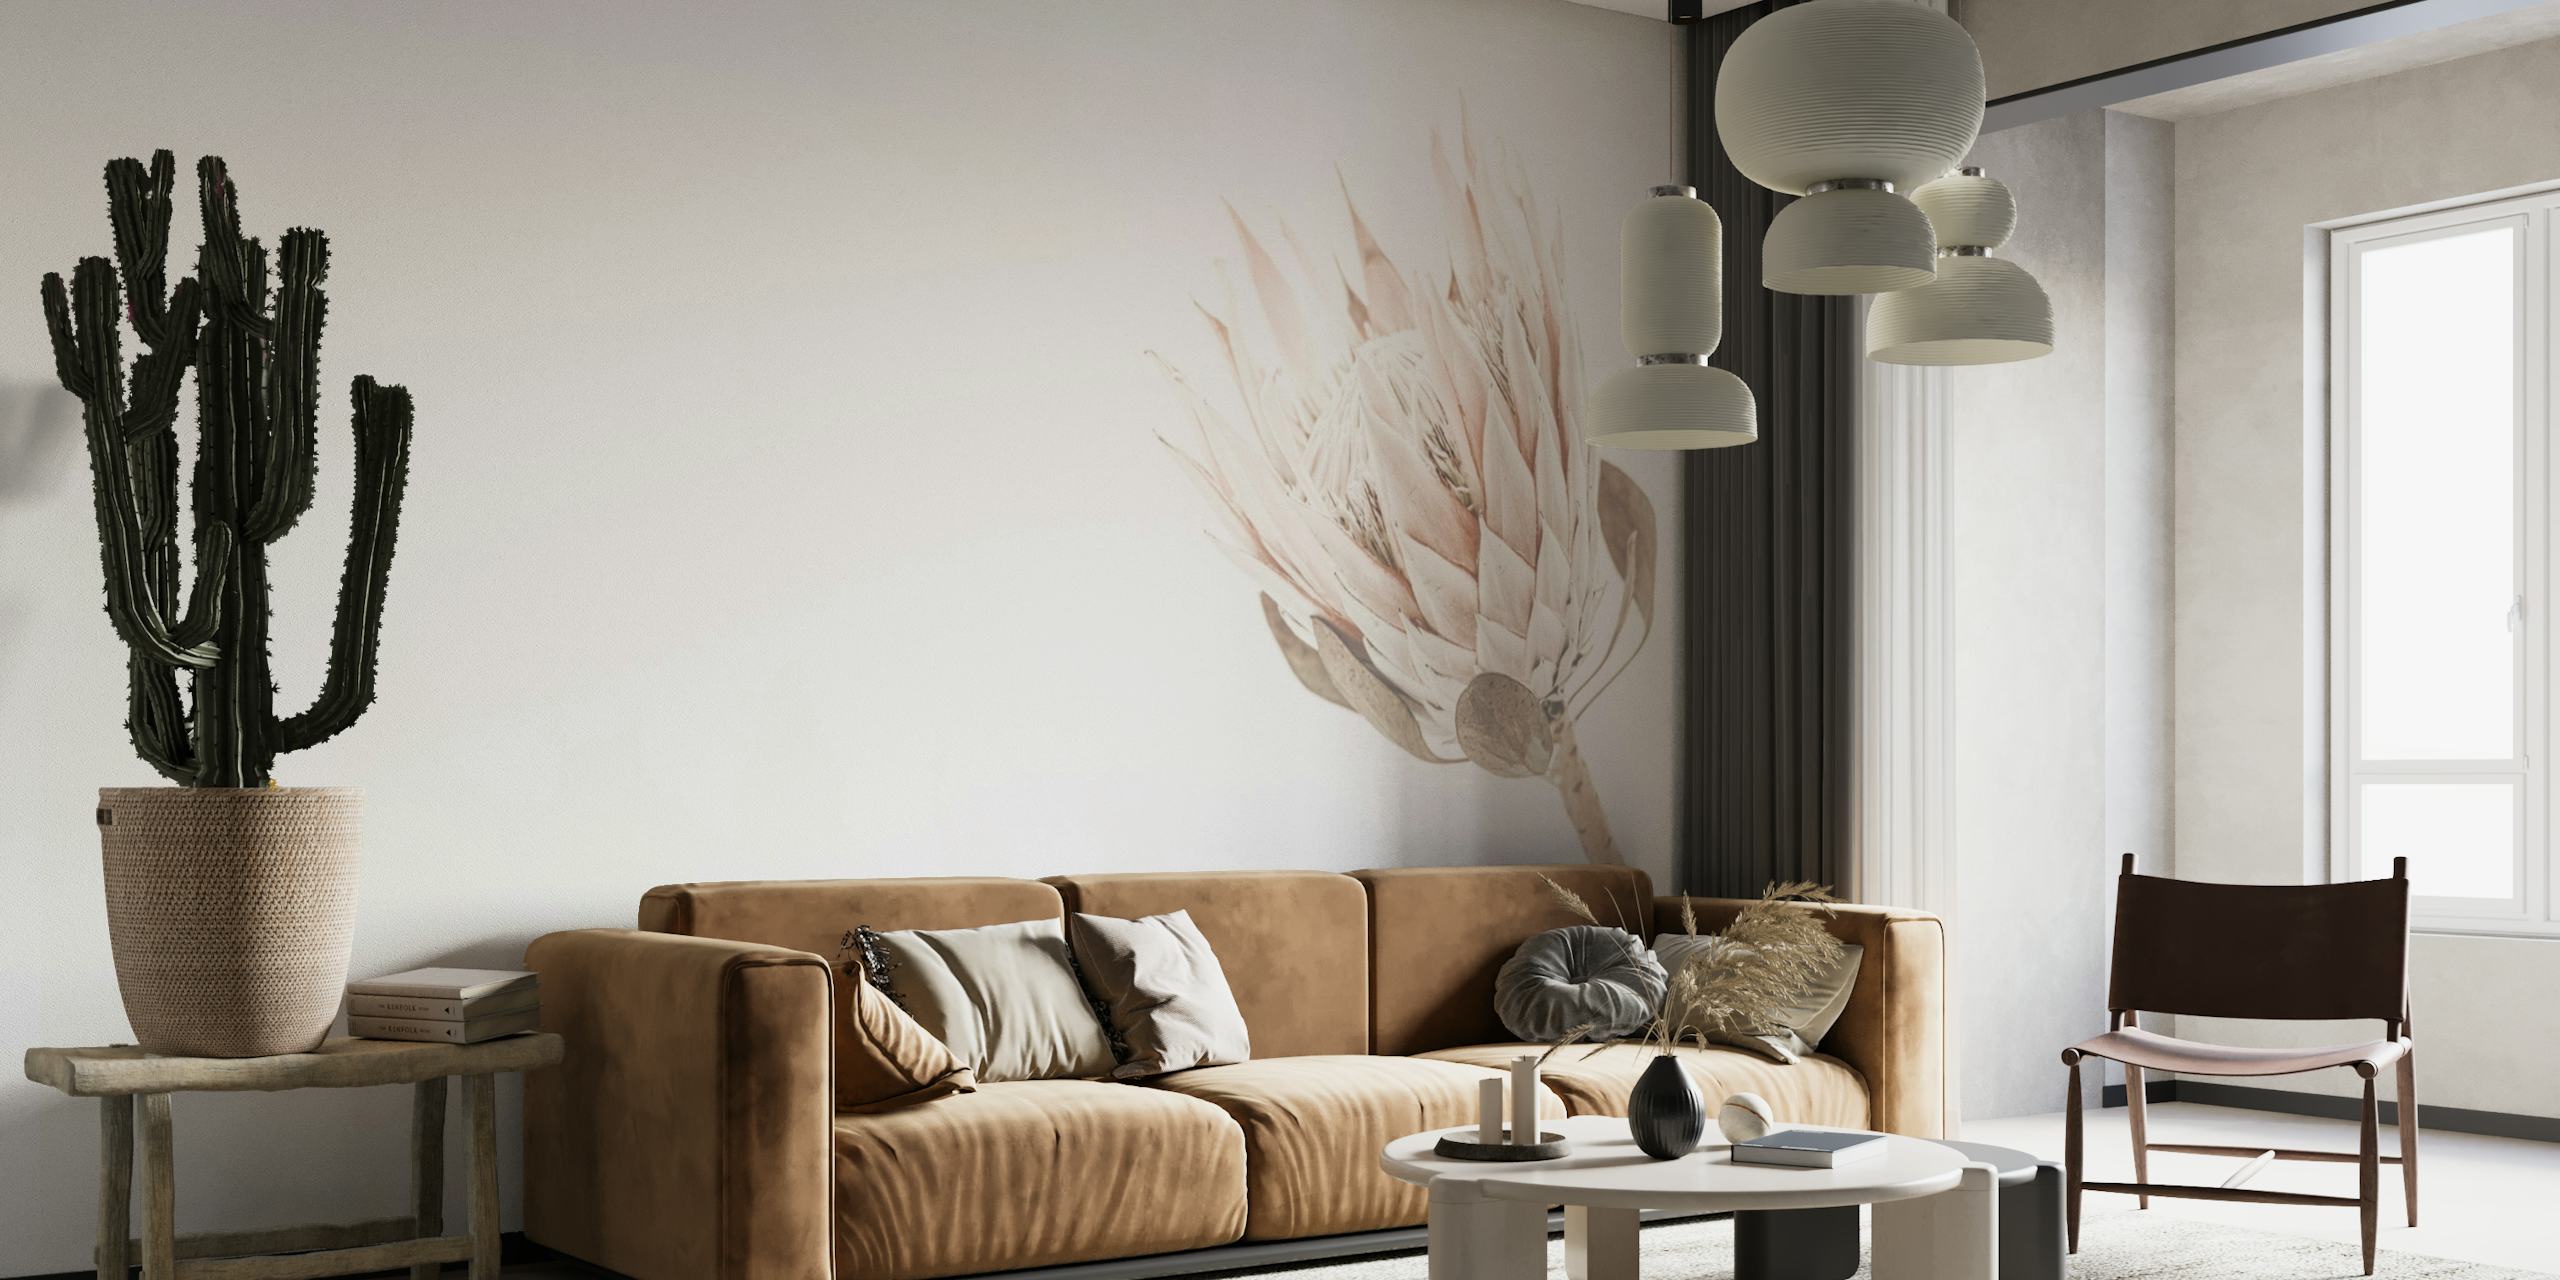 Protea Creme wall mural featuring a single pale protea bloom against a creamy background